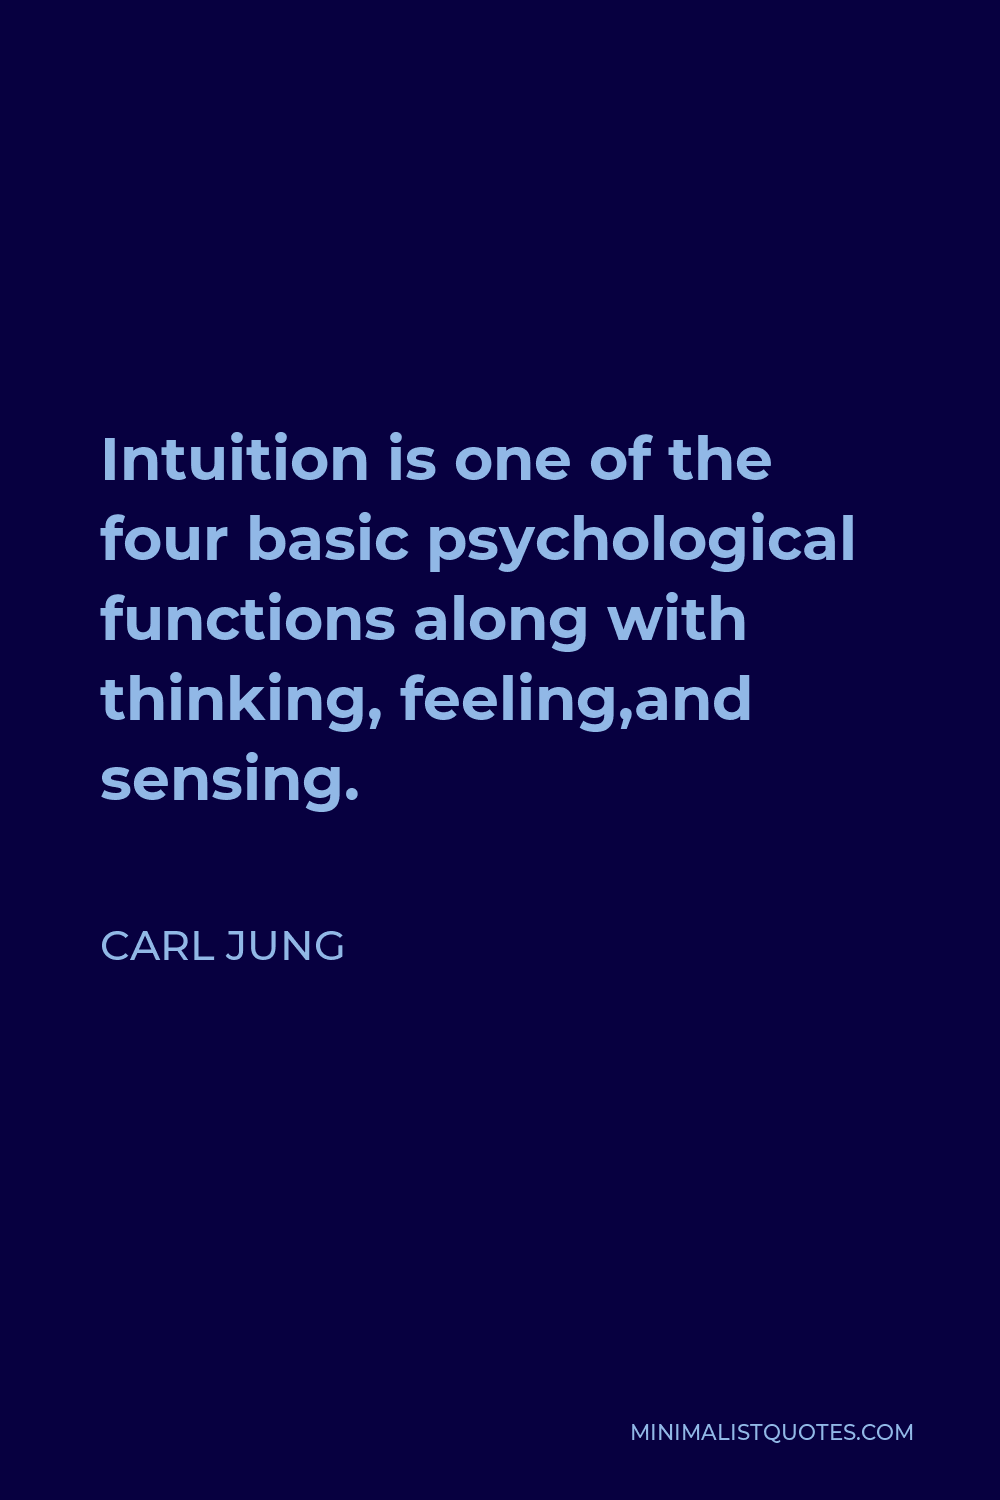 Carl Jung Quote - Intuition is one of the four basic psychological functions along with thinking, feeling,and sensing.